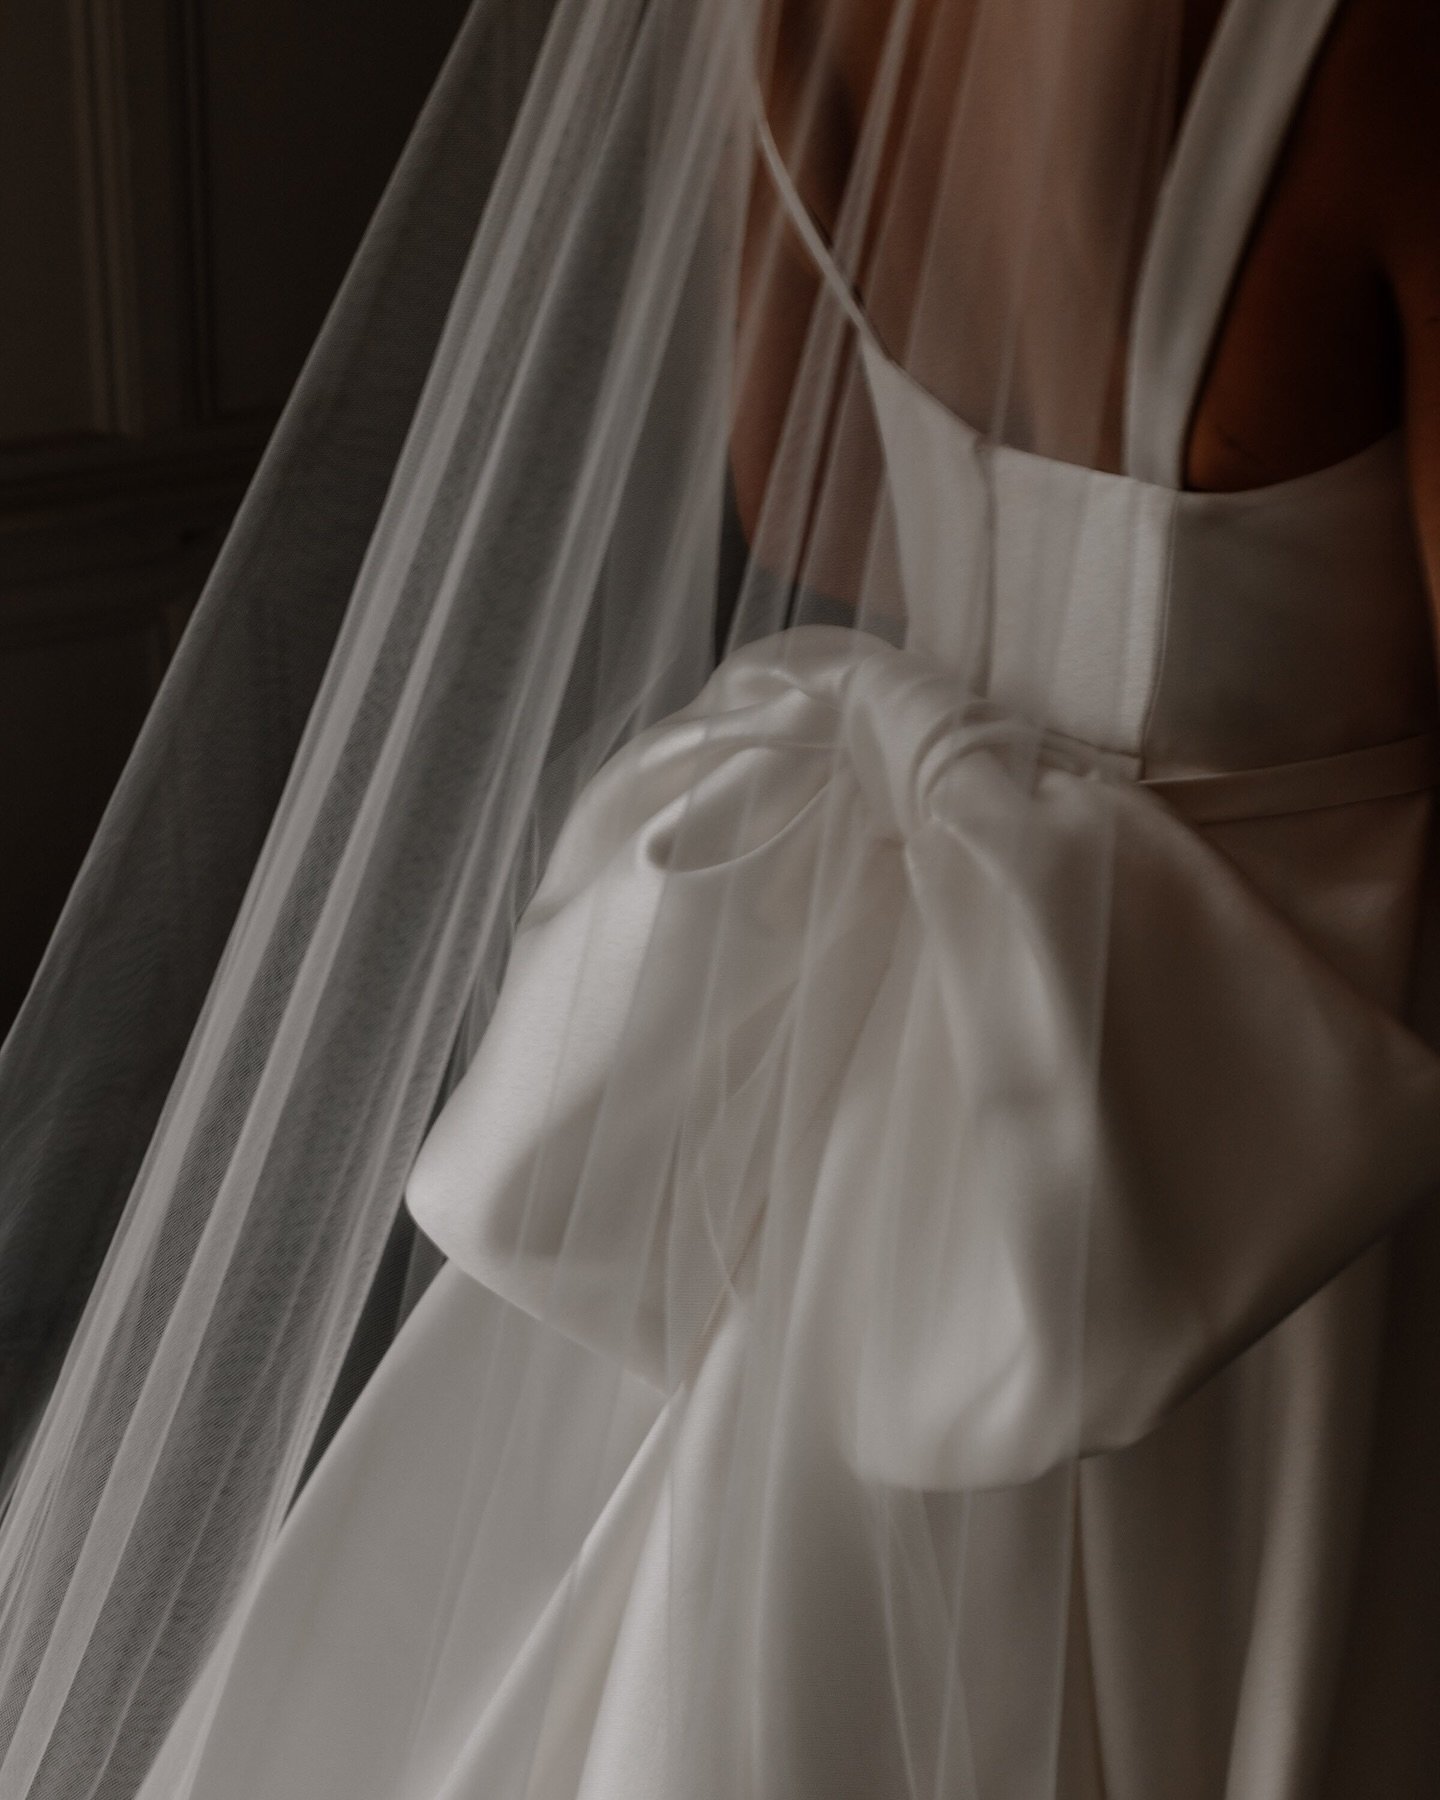 &ldquo;I didn&rsquo;t even have to look in the mirror to know it was the one. The way the dress made me feel was the give away. I knew that was how I wanted to feel when I got married. Oh, and then the tears! When I did see my reflection, I still fel